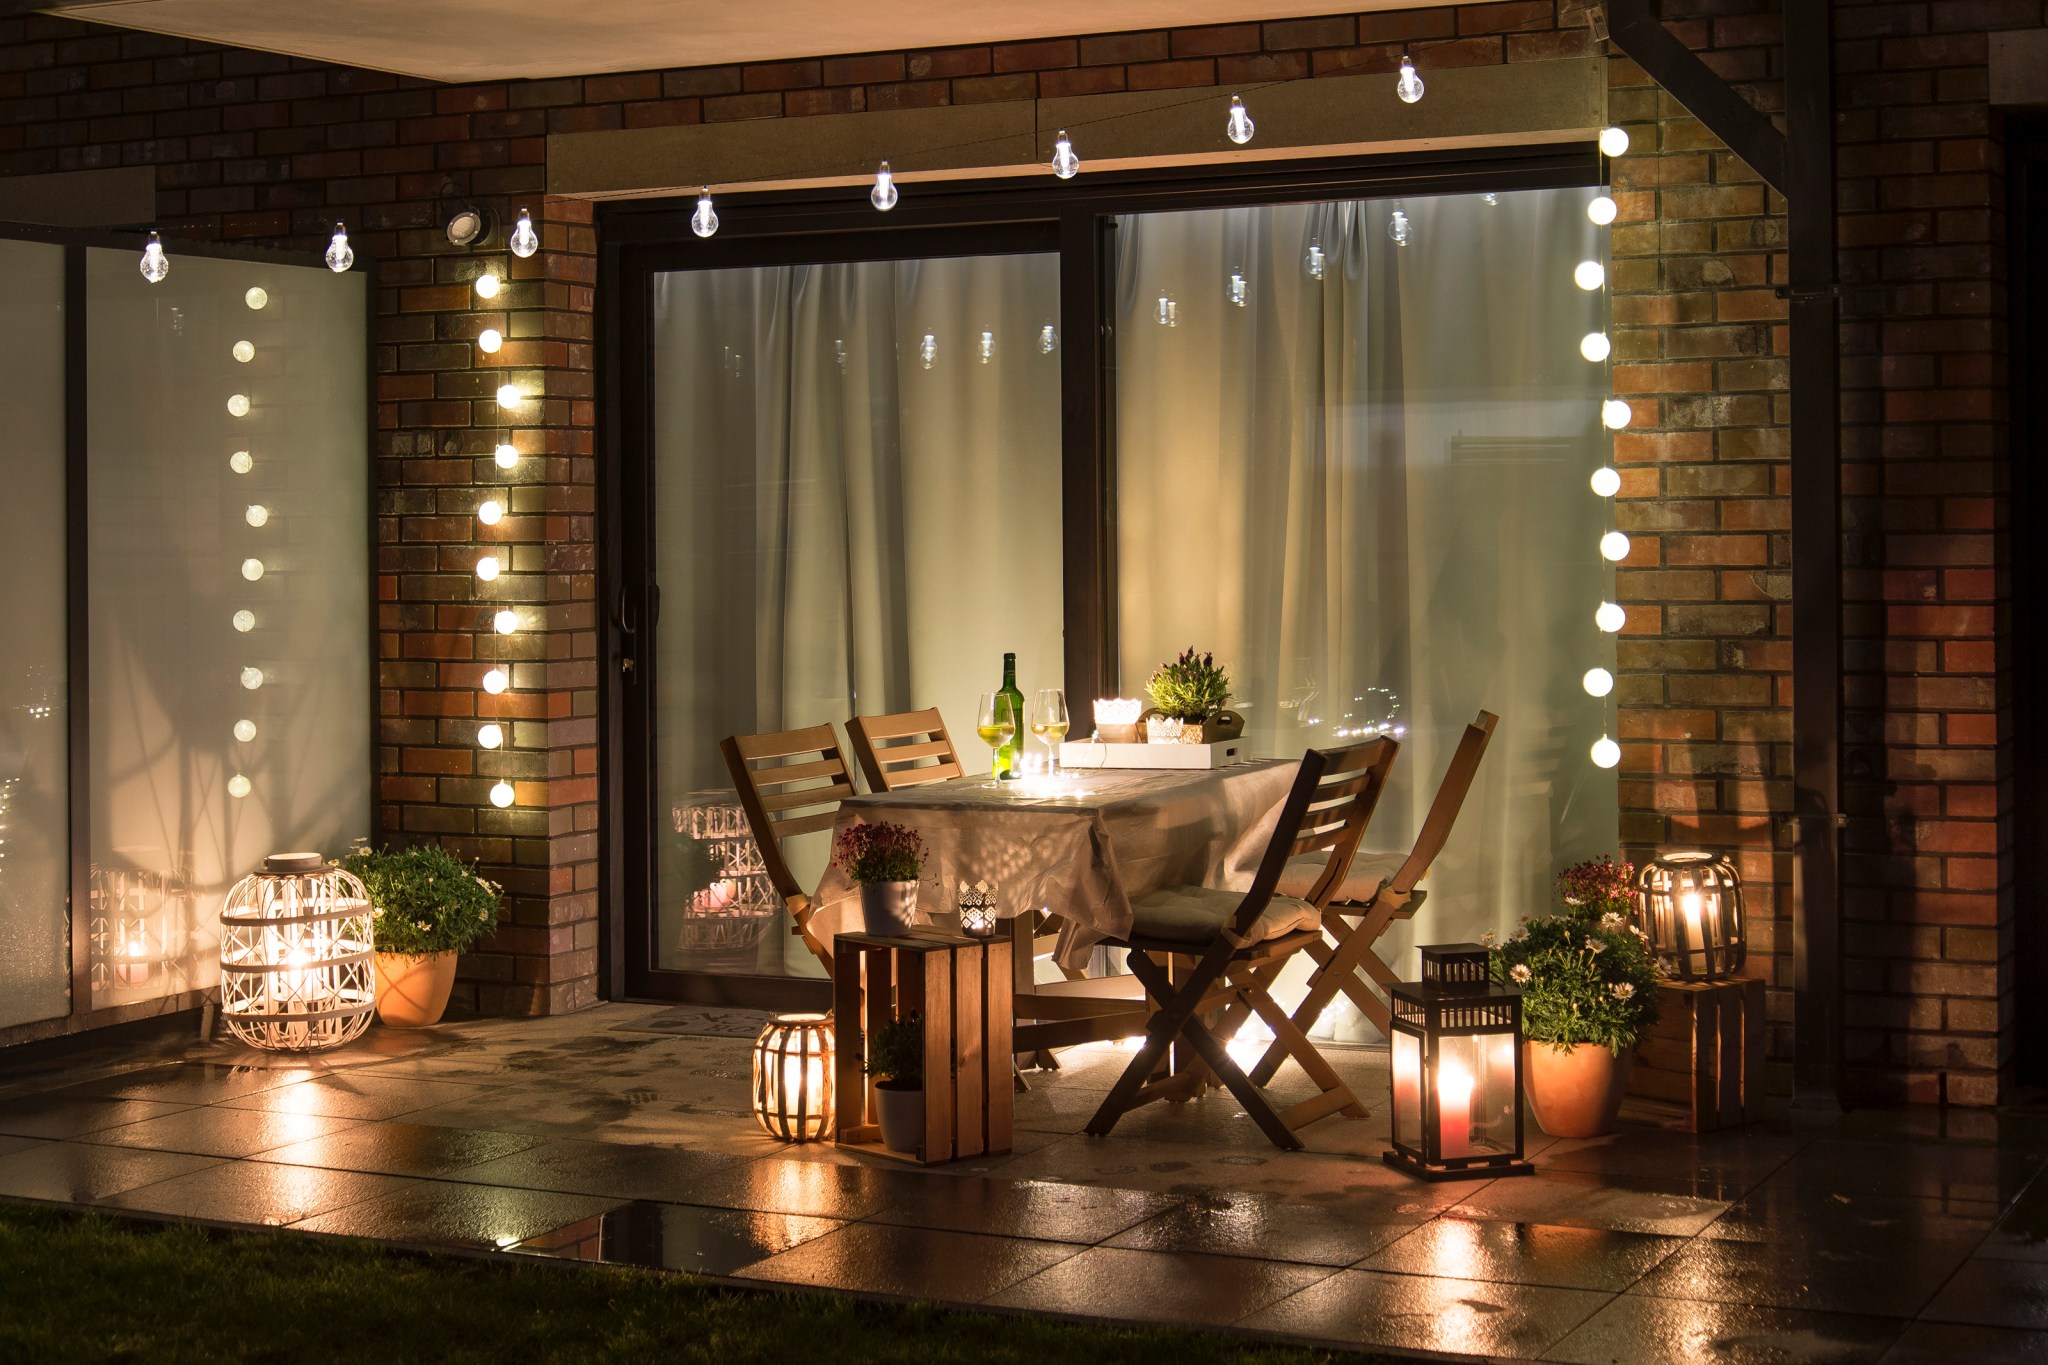 outdoor patio at night with a string lights around the sliding door and above a wooden table with candles and lanterns illuminating the terrace